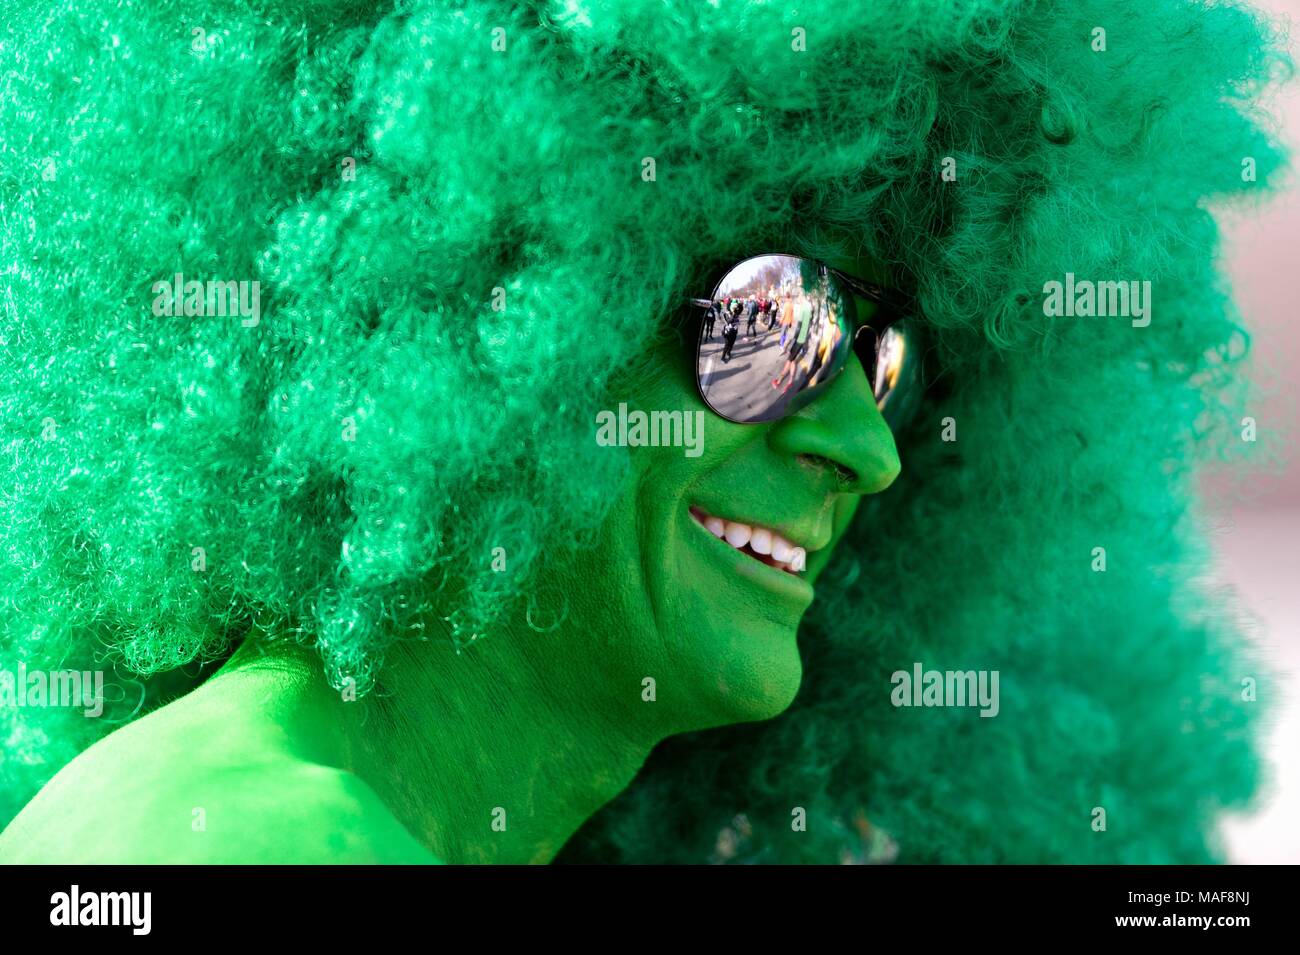 Chicago, Illinois, USA. Fitted in green from head to toe, befitting the theme of the race, a runner pauses beyond the finish line. Stock Photo